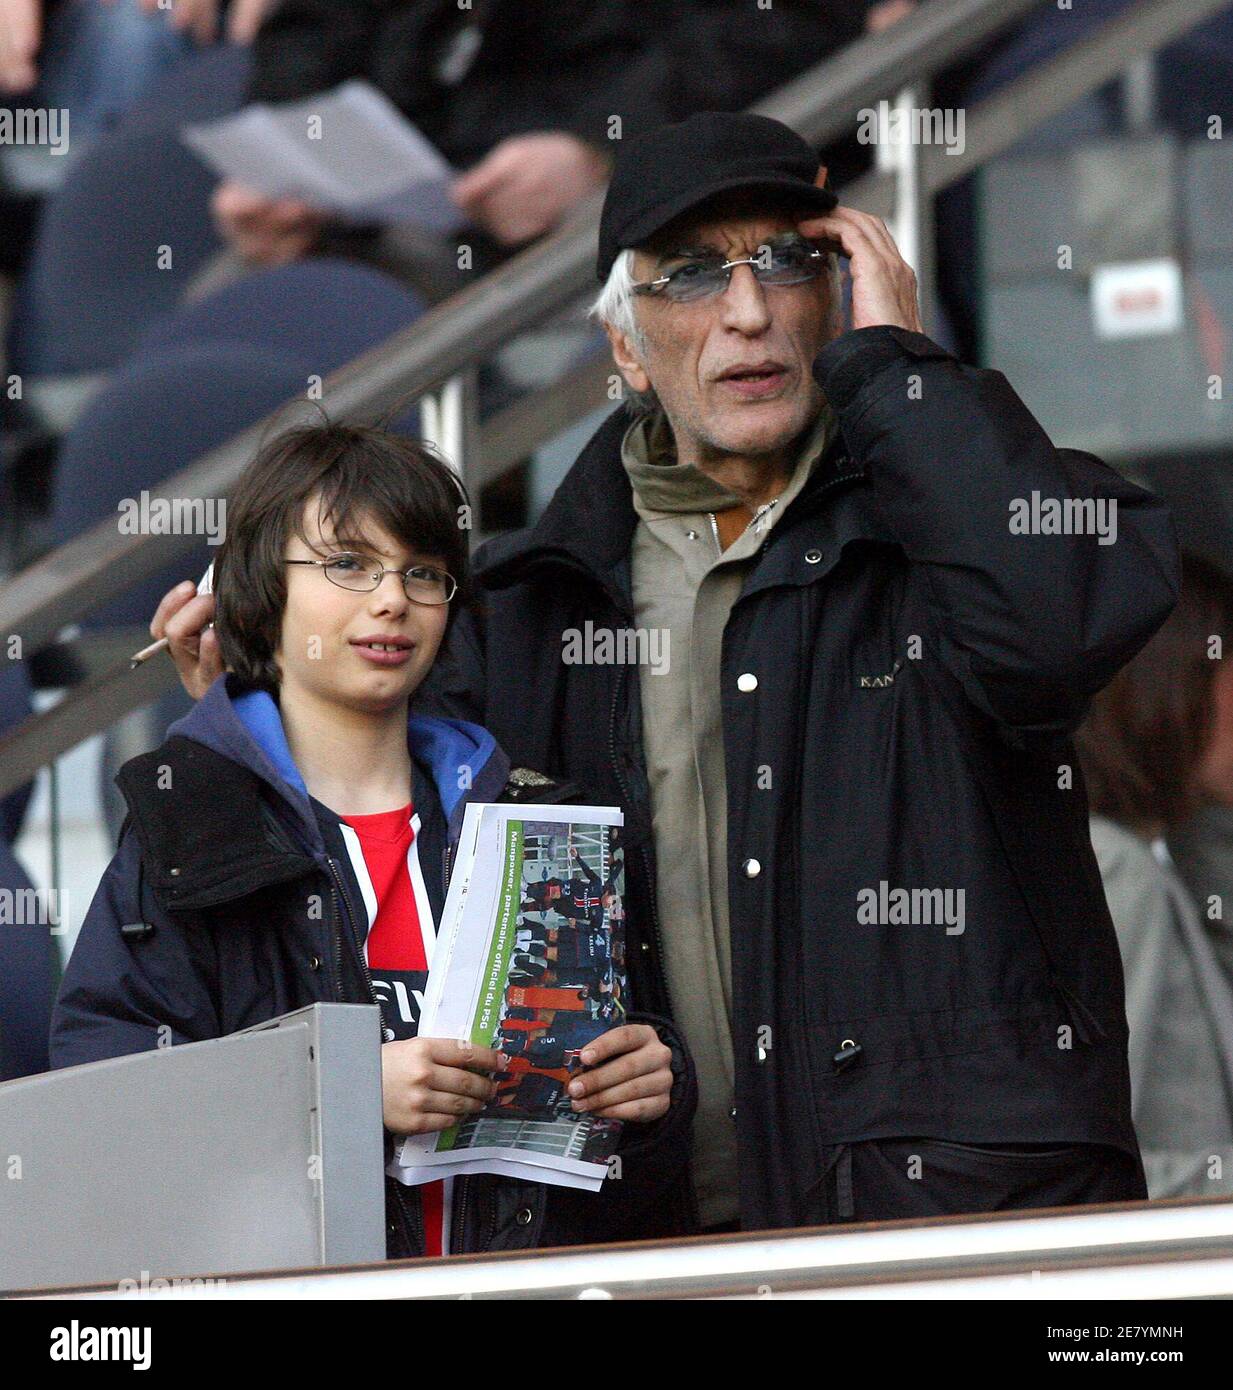 French actor Gerard Darmon and his son attend the French first league football match Paris Saint-Germain vs Le Mans at the Parc des Princes in Paris, France, on April 7, 2007. PSG won 2-1. Photo by Mehdi Taamallah/Cameleon/ABACAPRESS.COM Stock Photo